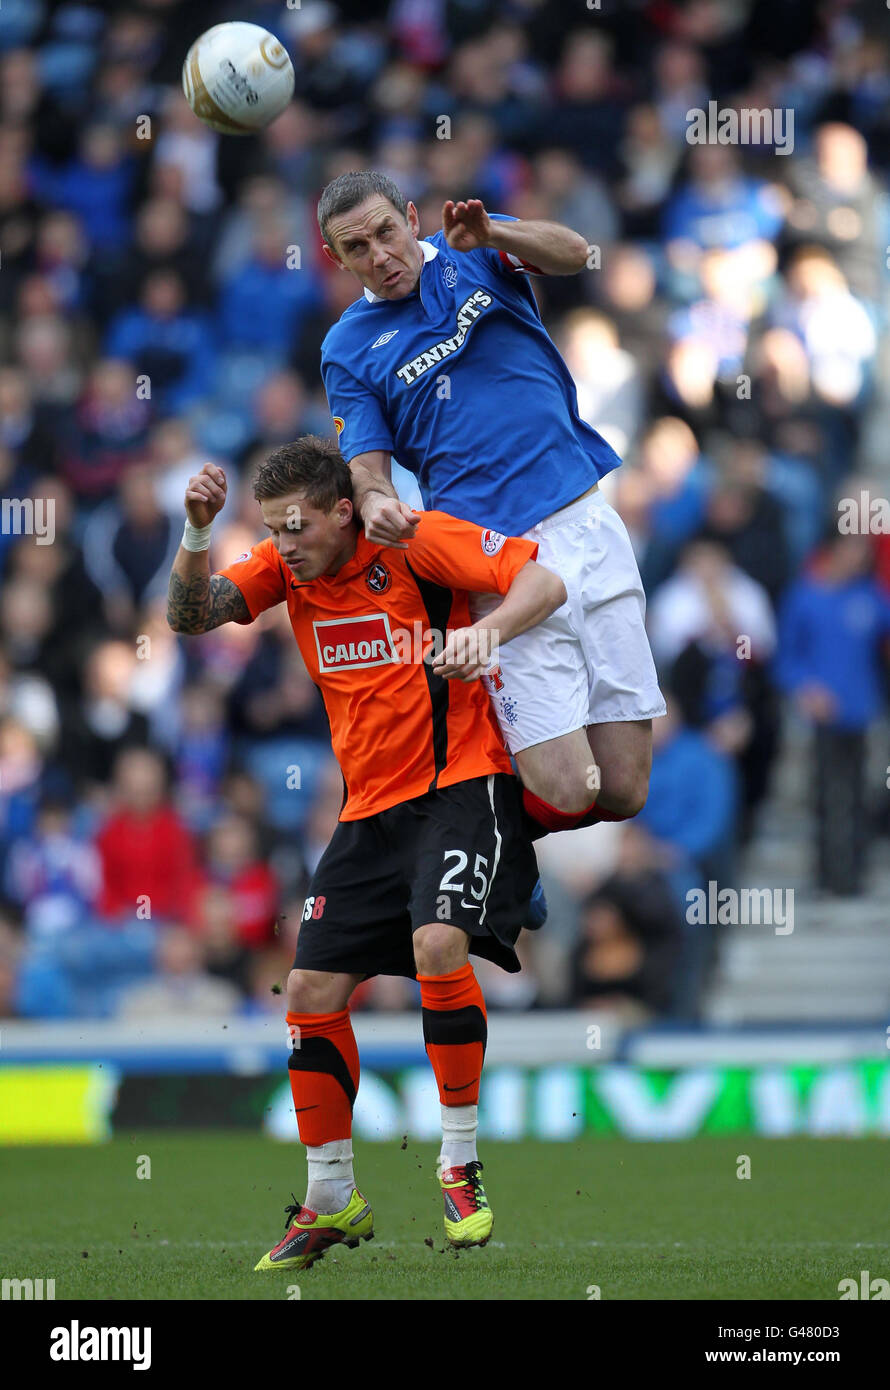 Rangers' David Weir and Dundee United's David Goodwillie during the Clydesdale Bank Scottish Premier League match at Ibrox Stadium, Glasgow. Stock Photo